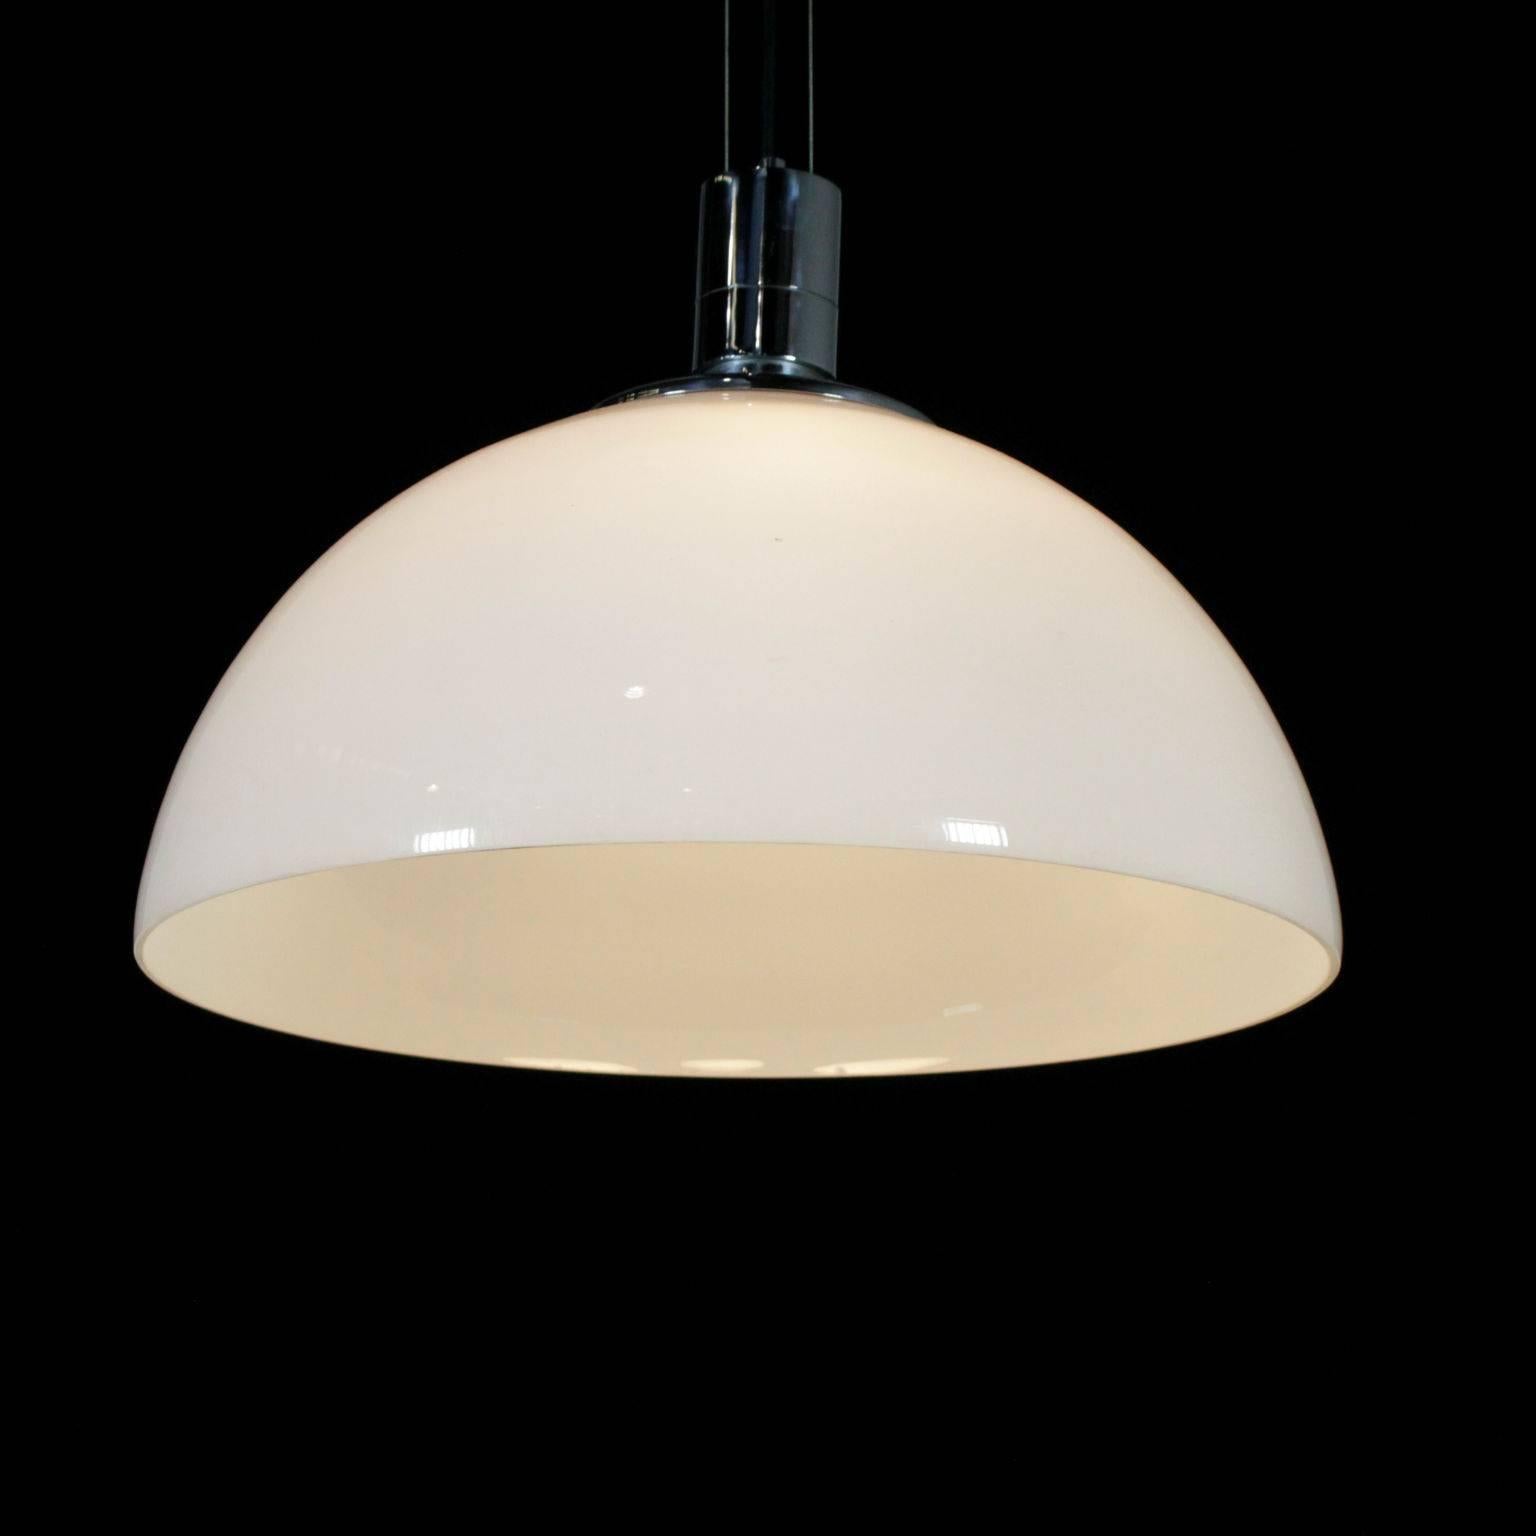 Mid-Century Modern Ceiling Lamp by Albini Chromed Metal Opal Glass Vintage, Italy, 1980s